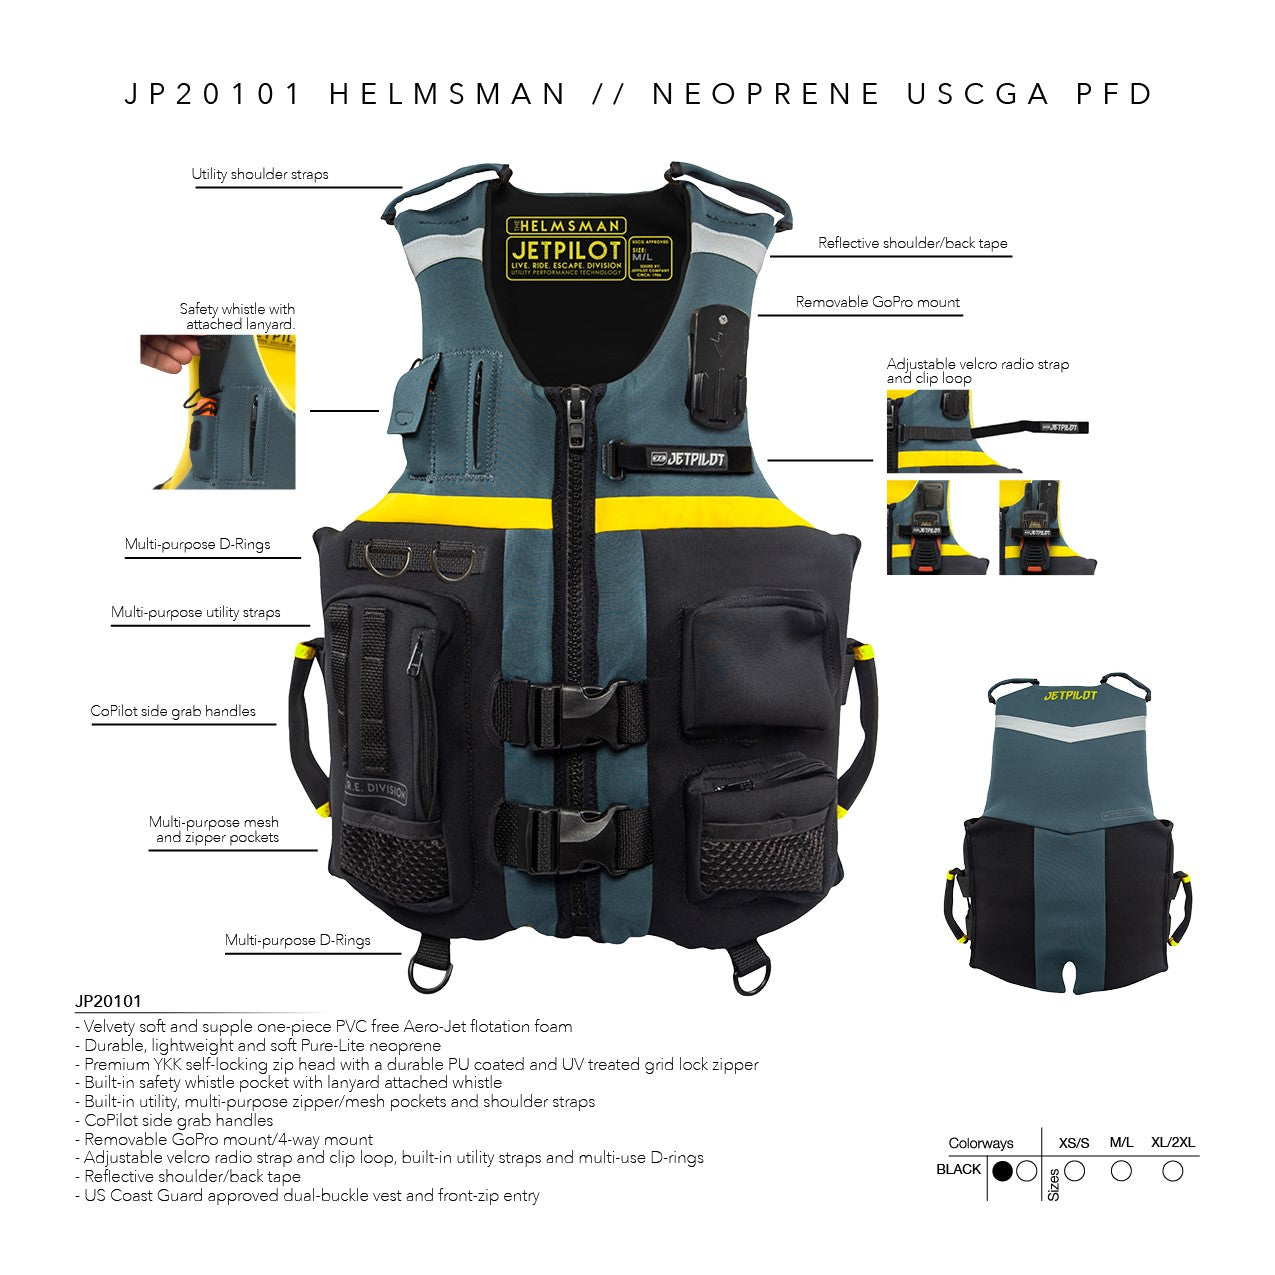 A image of call outs for the Jetpilot Helmsman life vest.